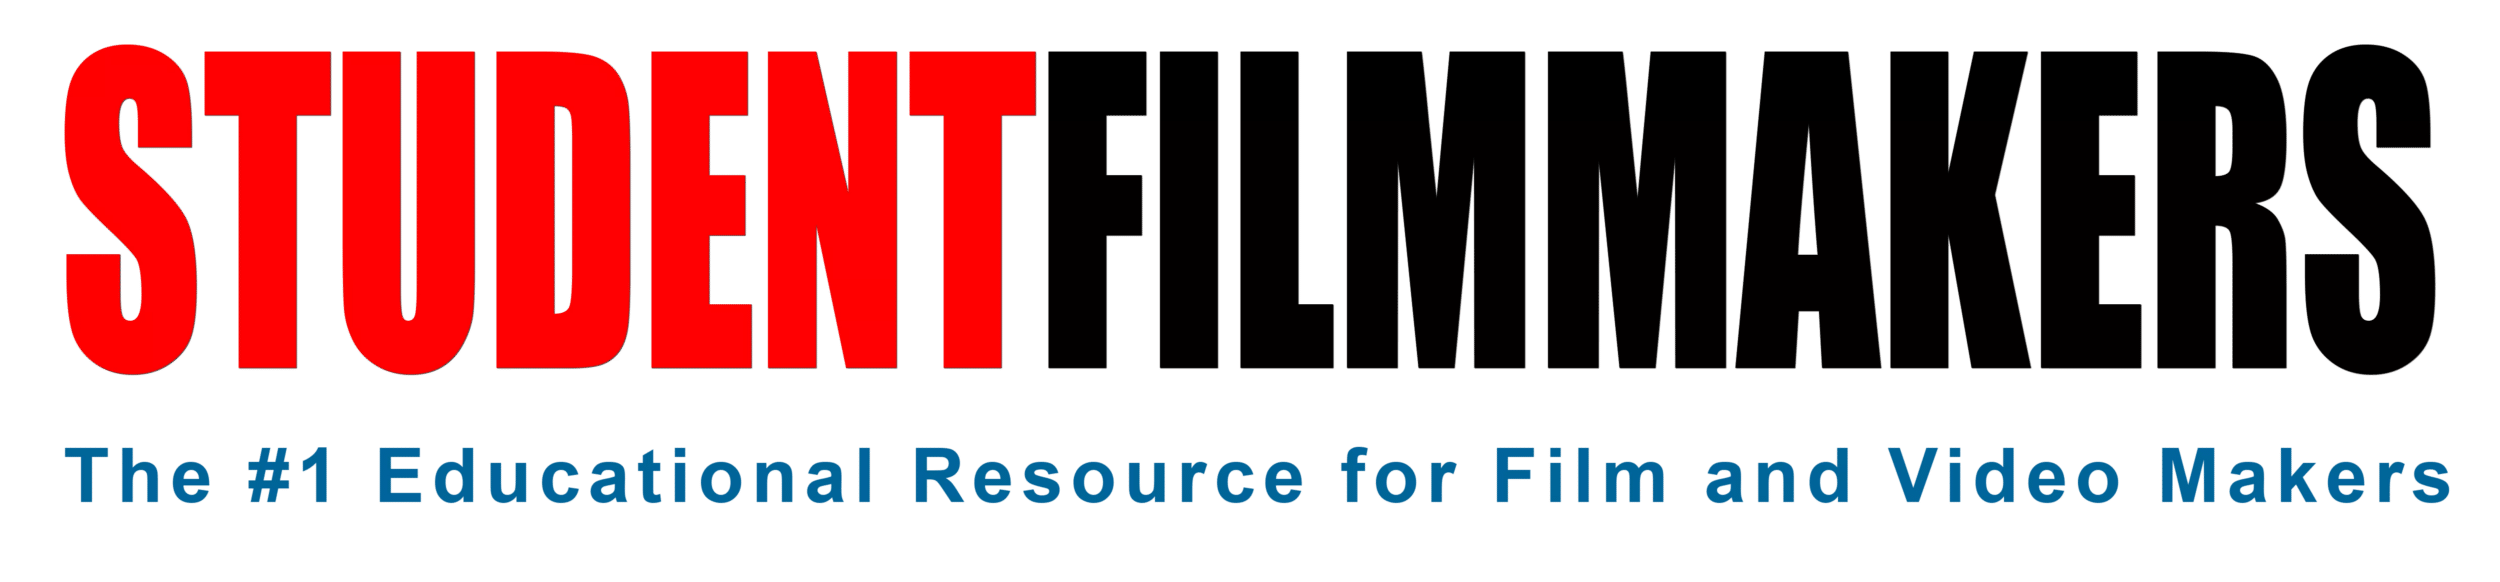 StudentFilmmakers.com and Student Filmmakers Magazine, the #1 Educational Resource for Film and Video Makers